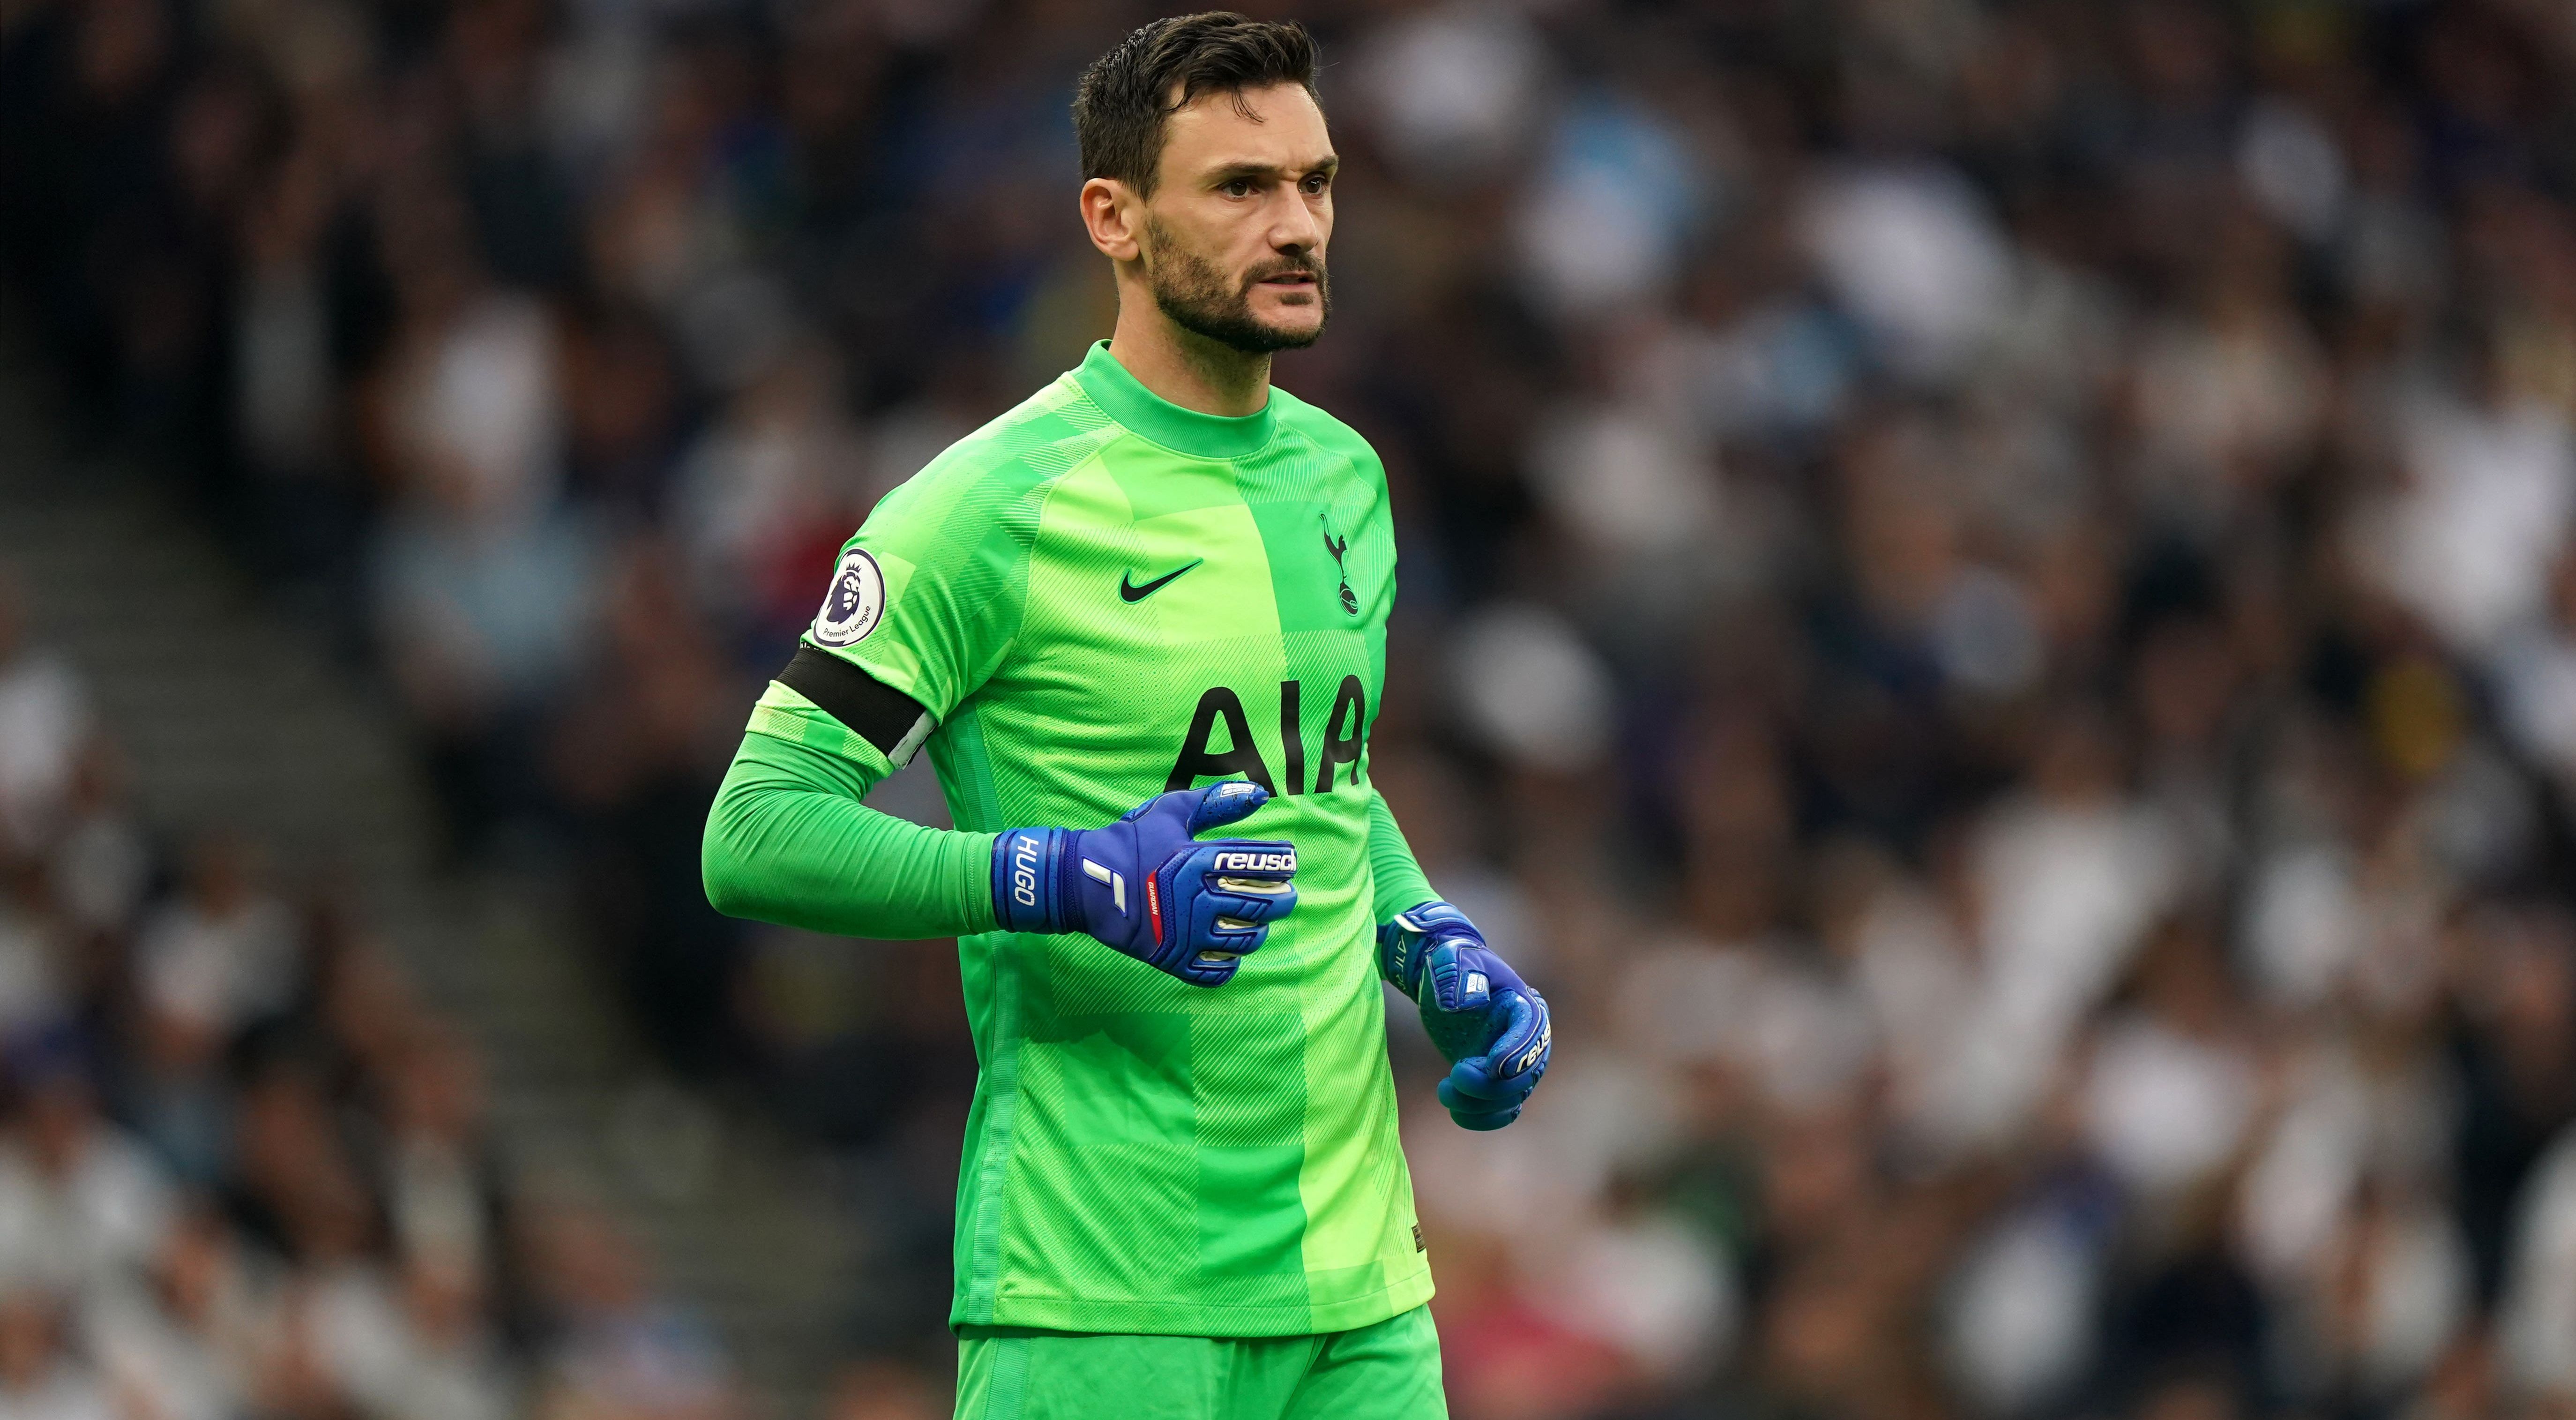 Hugo Lloris: 10 years, 10 saves, 10 tributes - a special feature